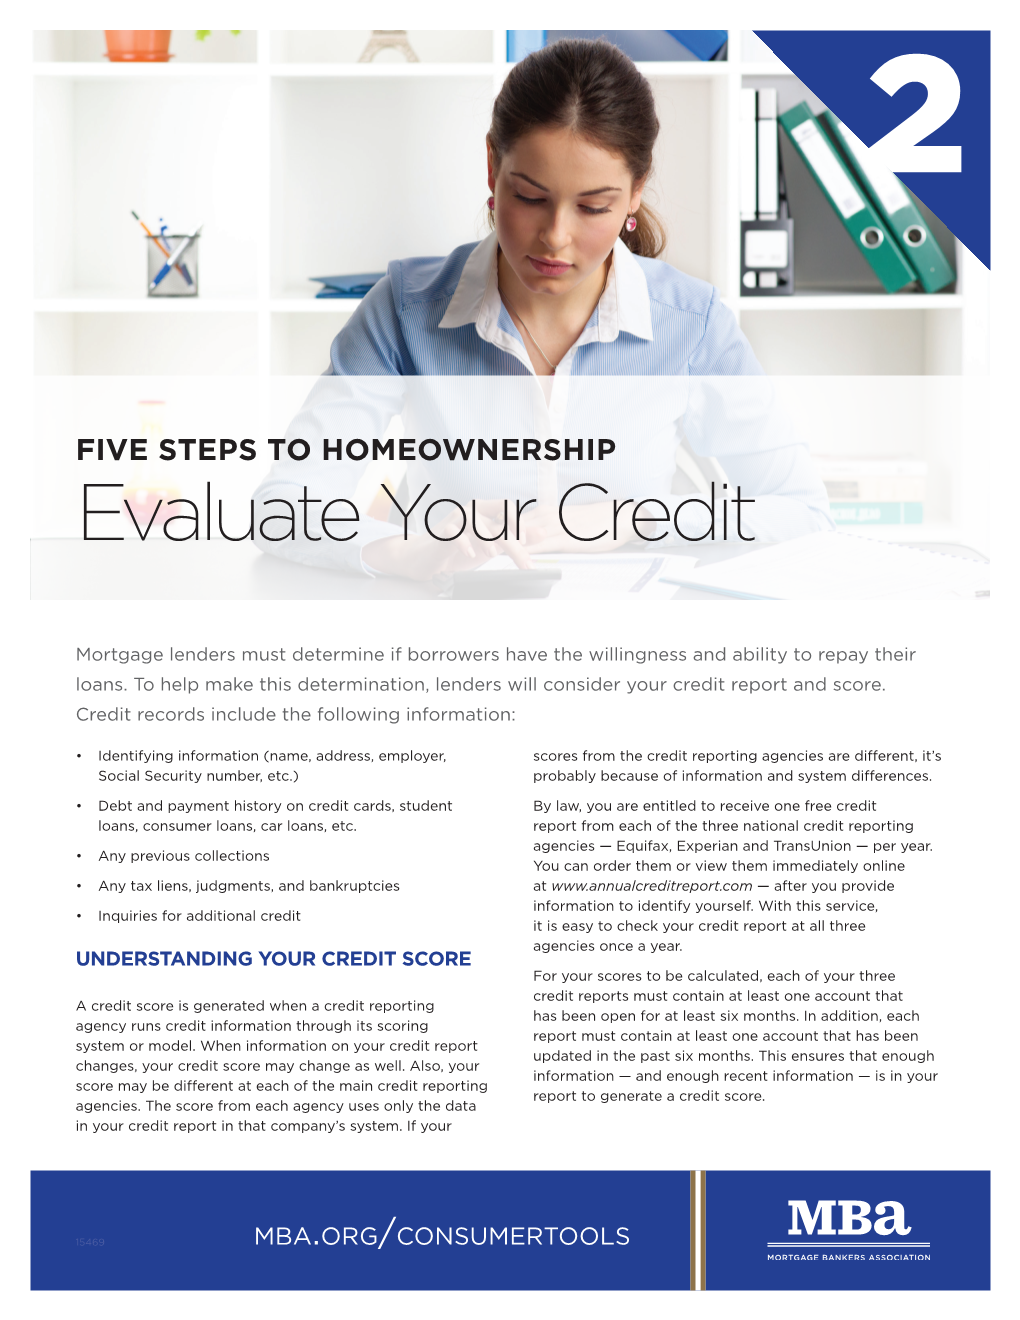 Evaluate Your Credit